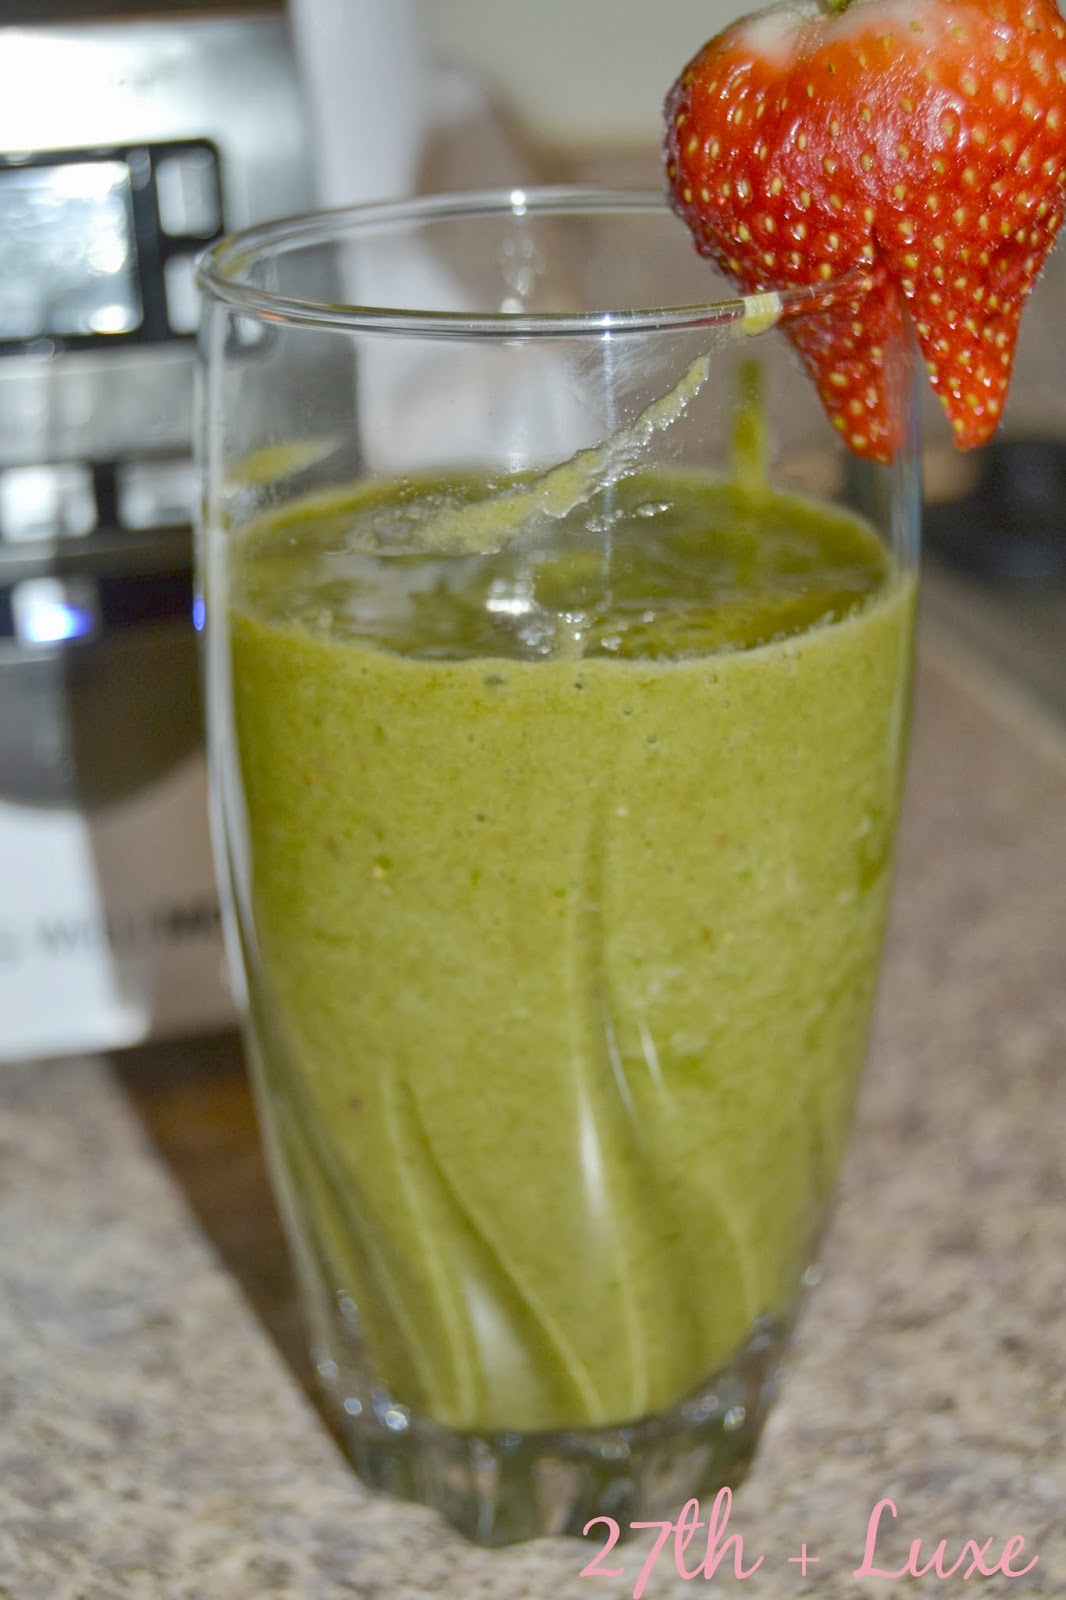 27th + Luxe: HEALTHY LIVING: GREEN SMOOTHIE